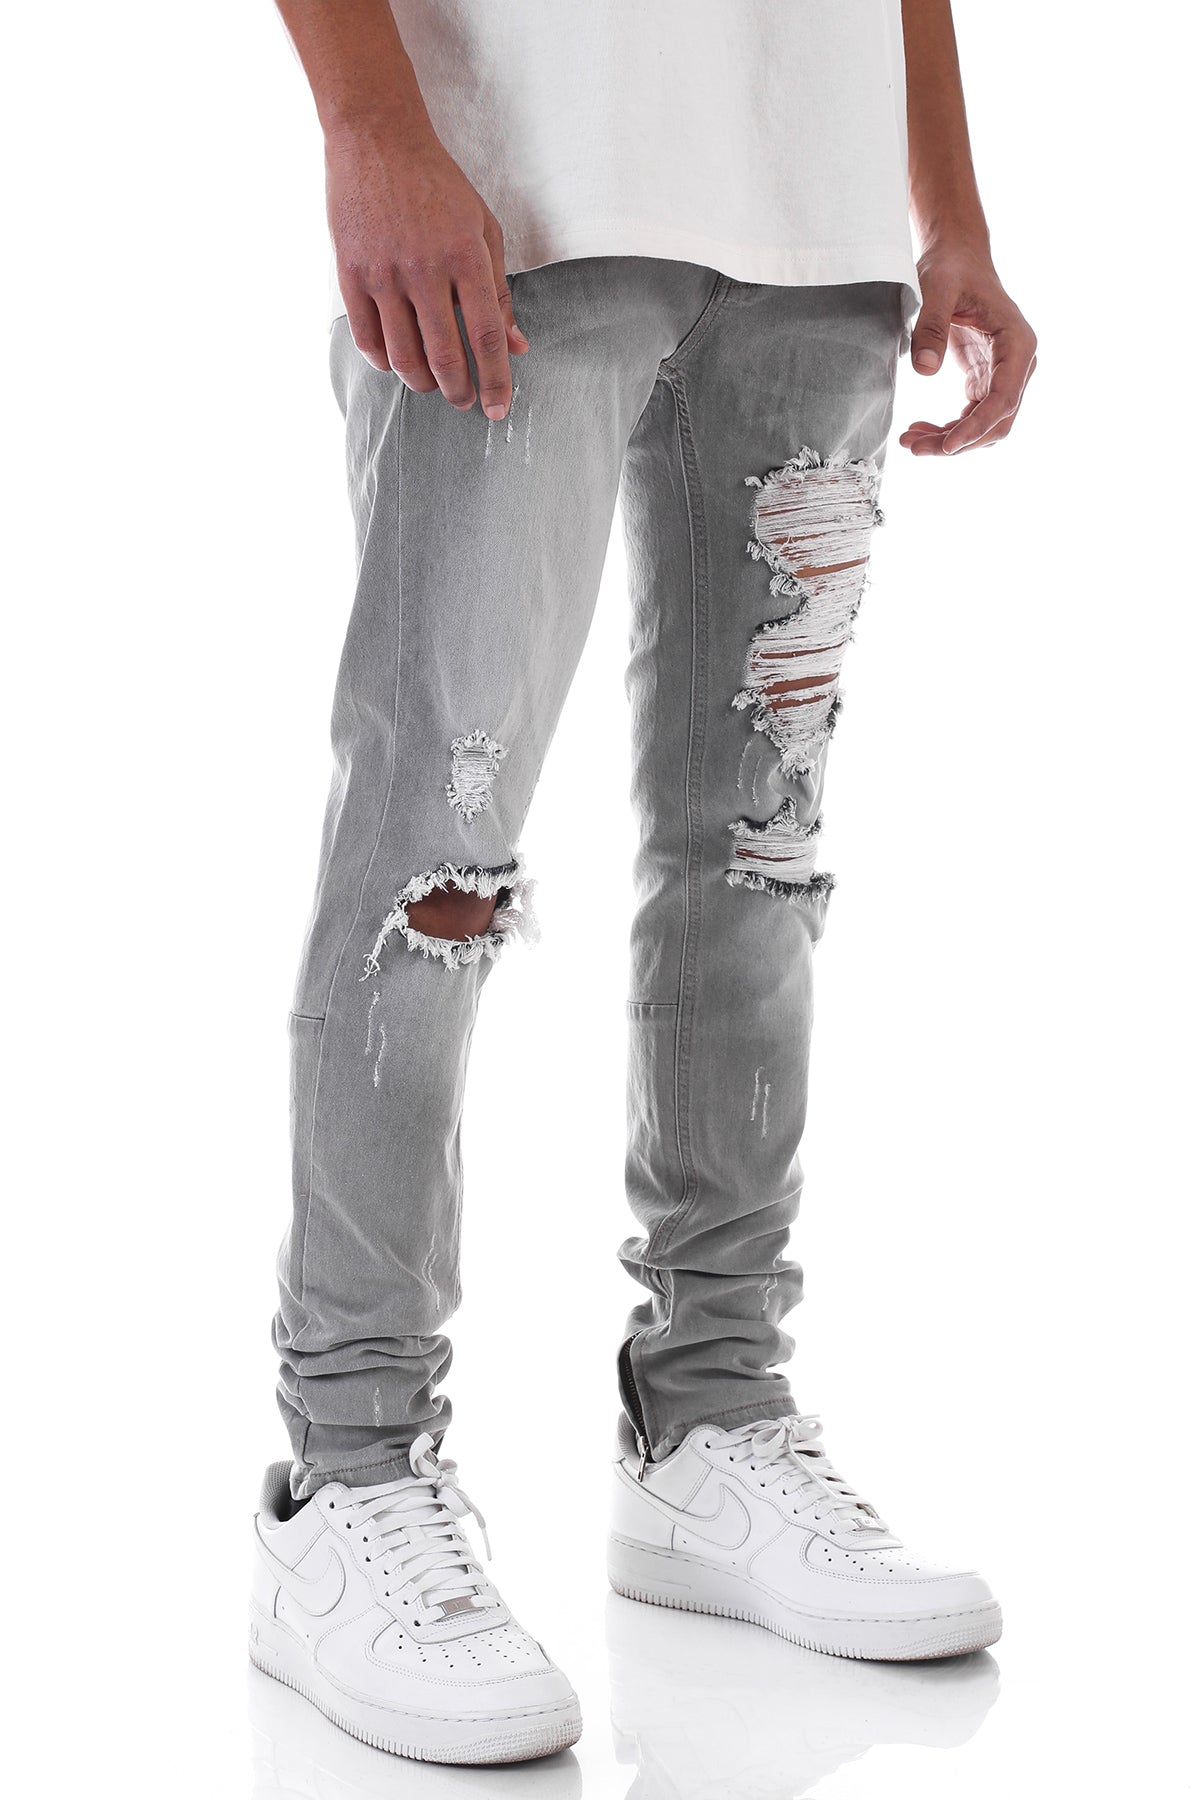 Skinny Jeans Men Slim Fit Stretch Distressed Jeans Pants Ankle Cuffs with  Zipper (Blue,31) at Amazon Men's Clothing store